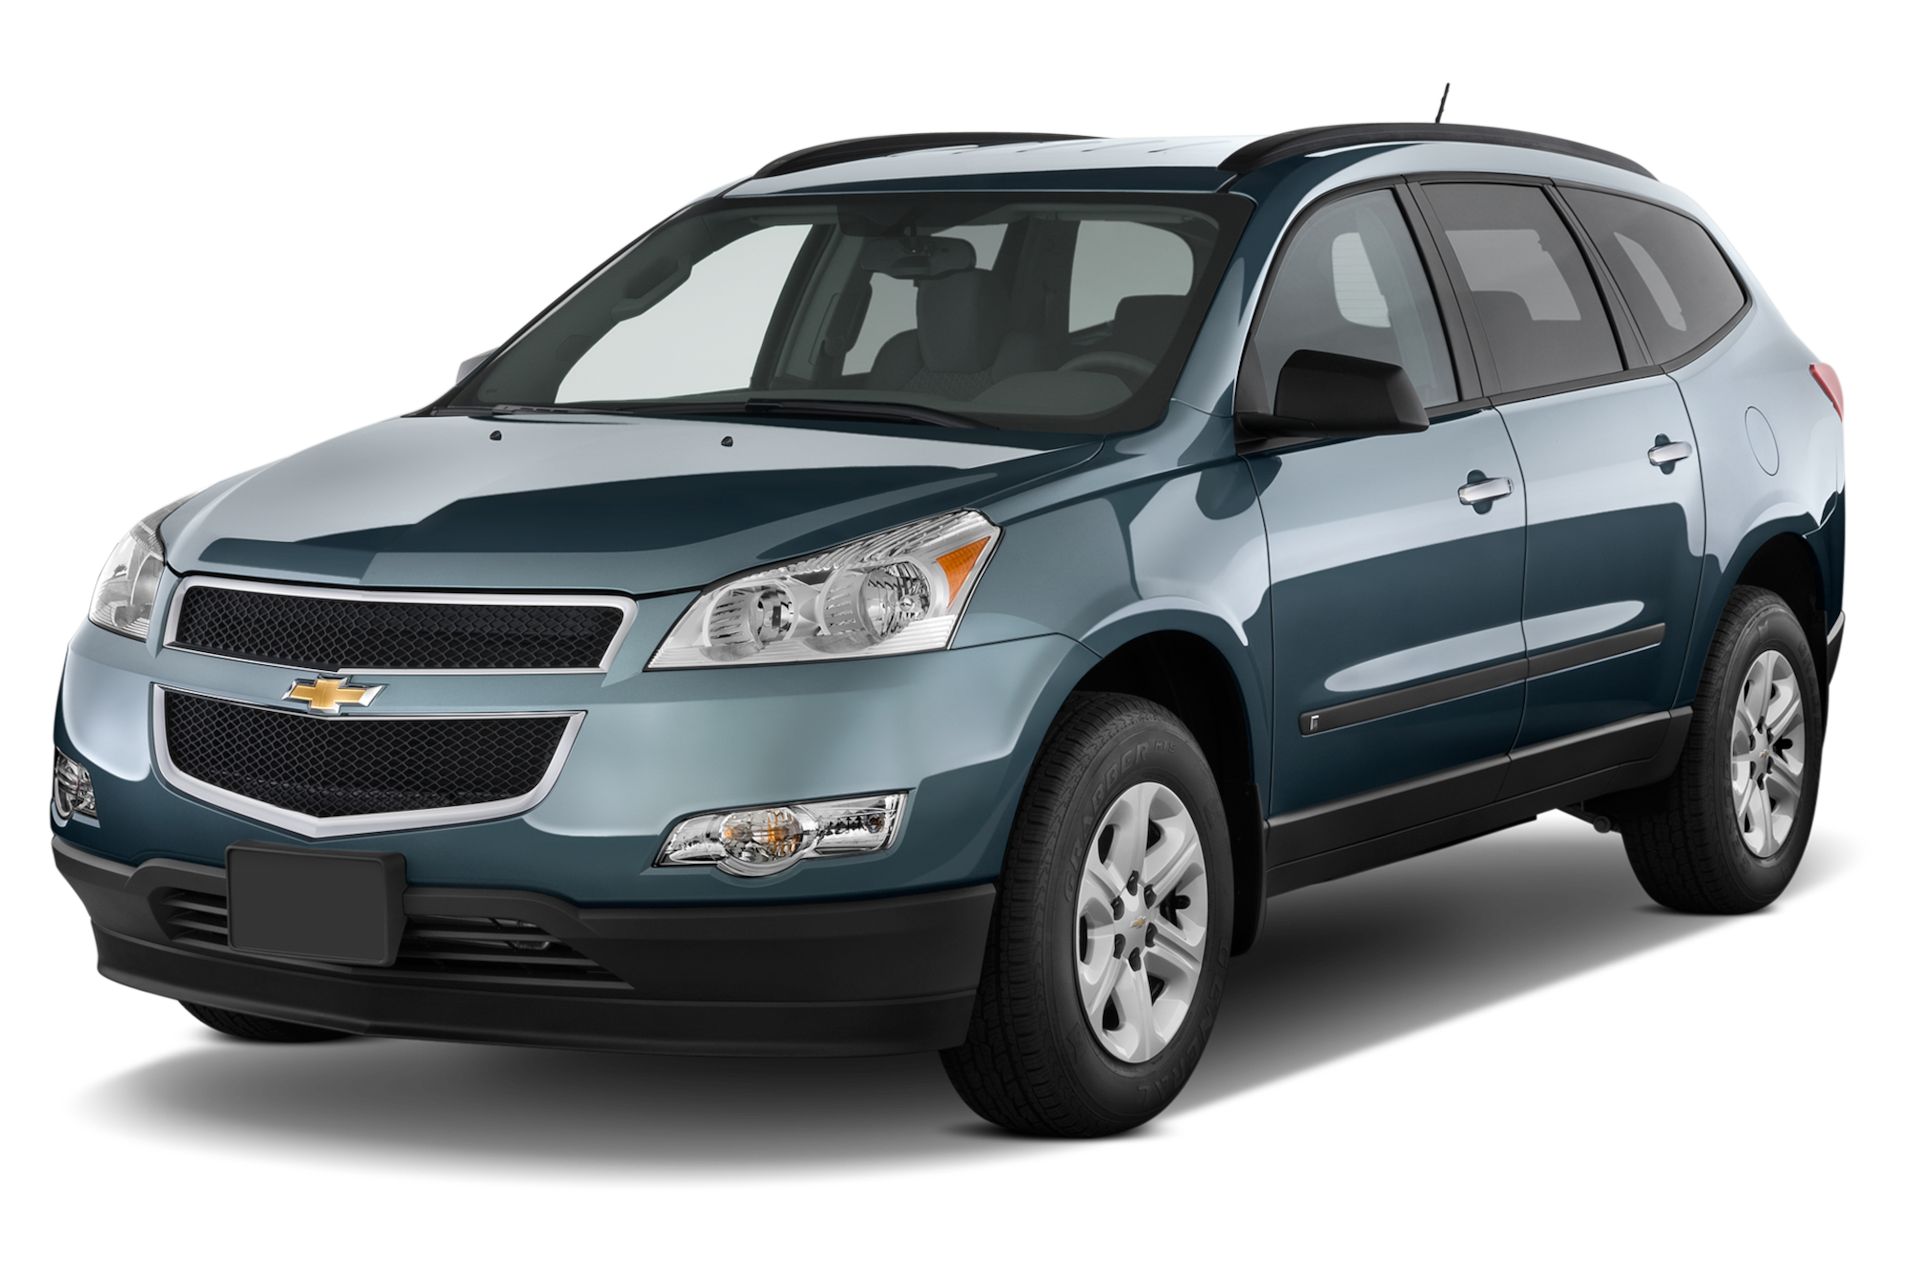 2012 Chevrolet Traverse Prices, Reviews, and Photos - MotorTrend